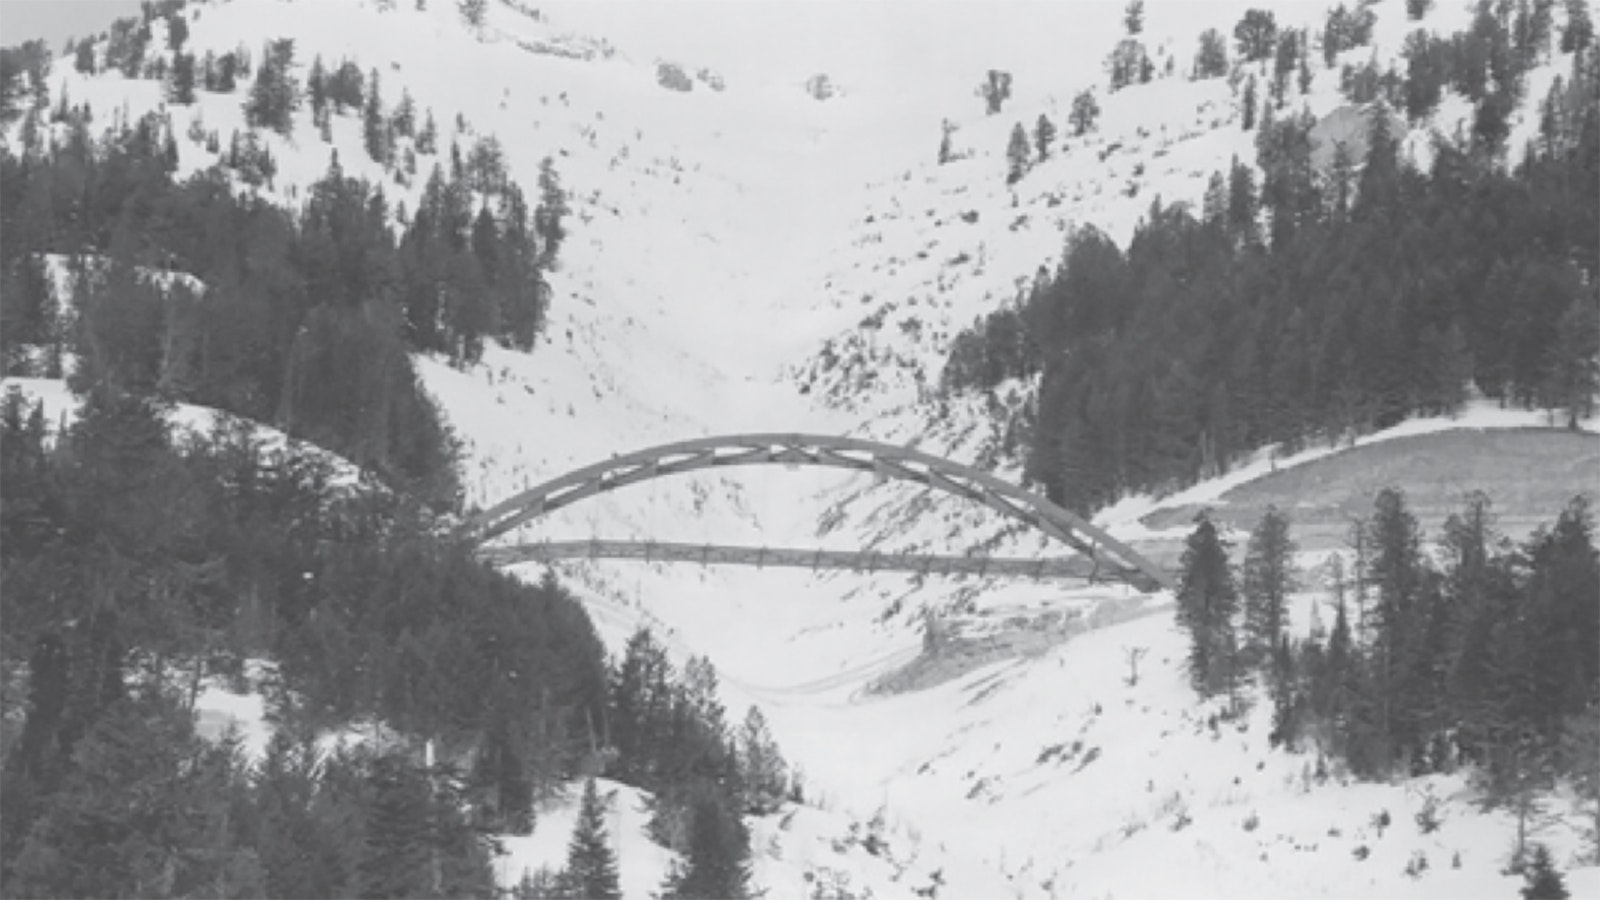 Teton Pass Bridge spanning the Glory Slide just before its demise in 1970.